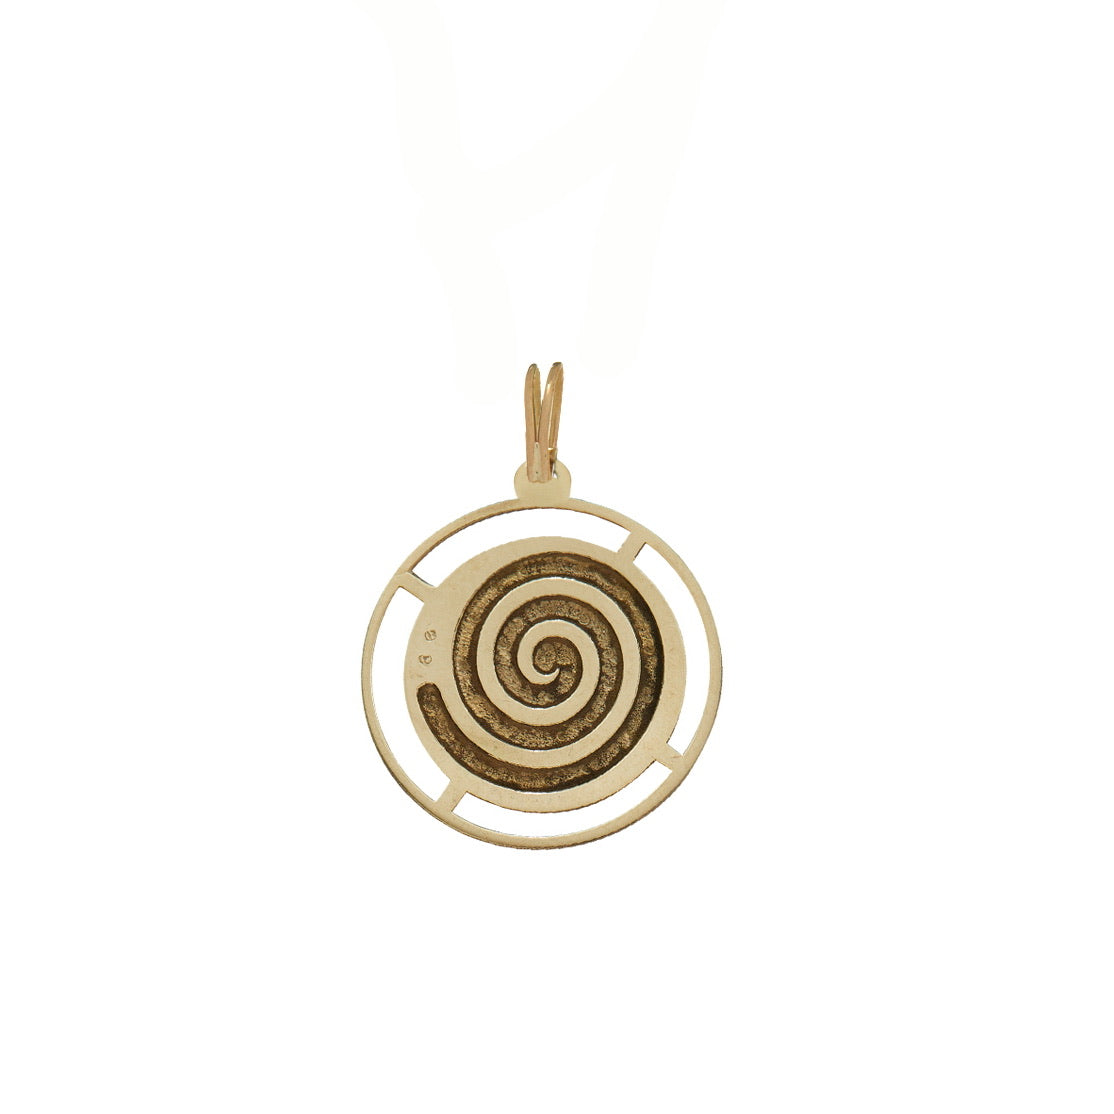 The Spiral of Life Necklace